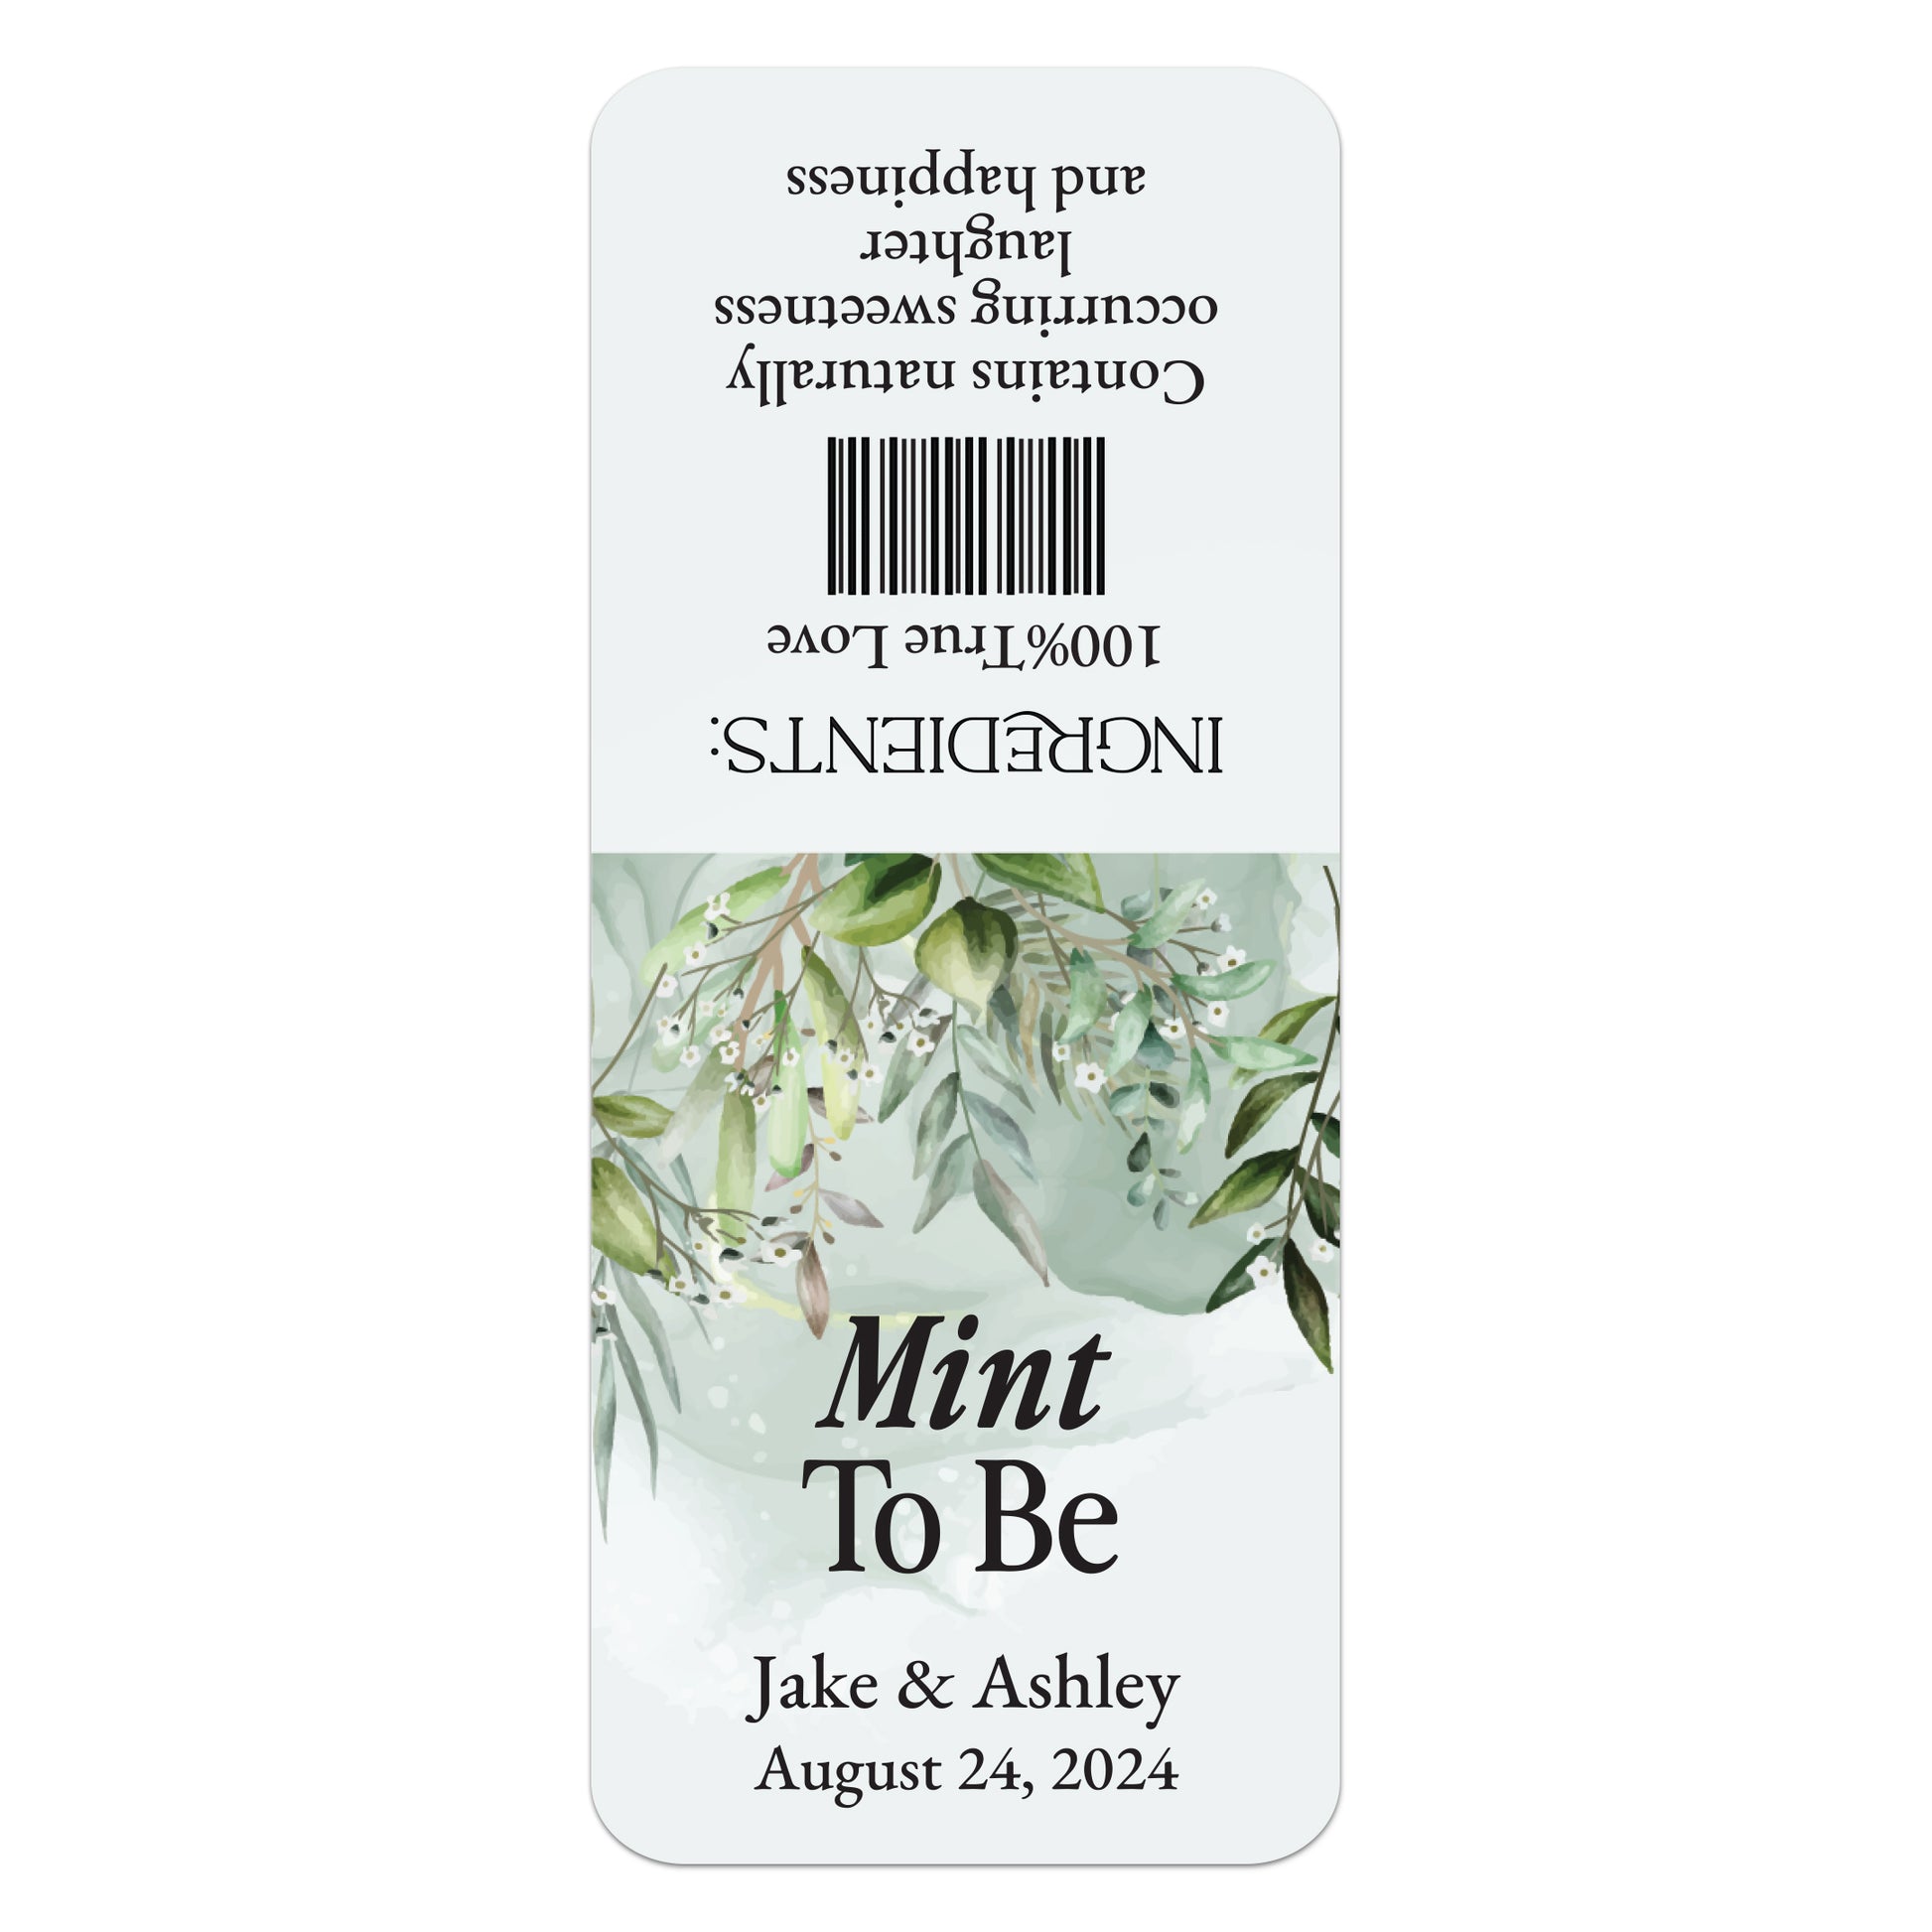 Enchanting Mint to Be stickers for Tic Tac boxes, featuring elegant greenery-colored backdrop with delicate floral branches and refined calligraphy, perfect for fairy tale-inspired wedding favors.